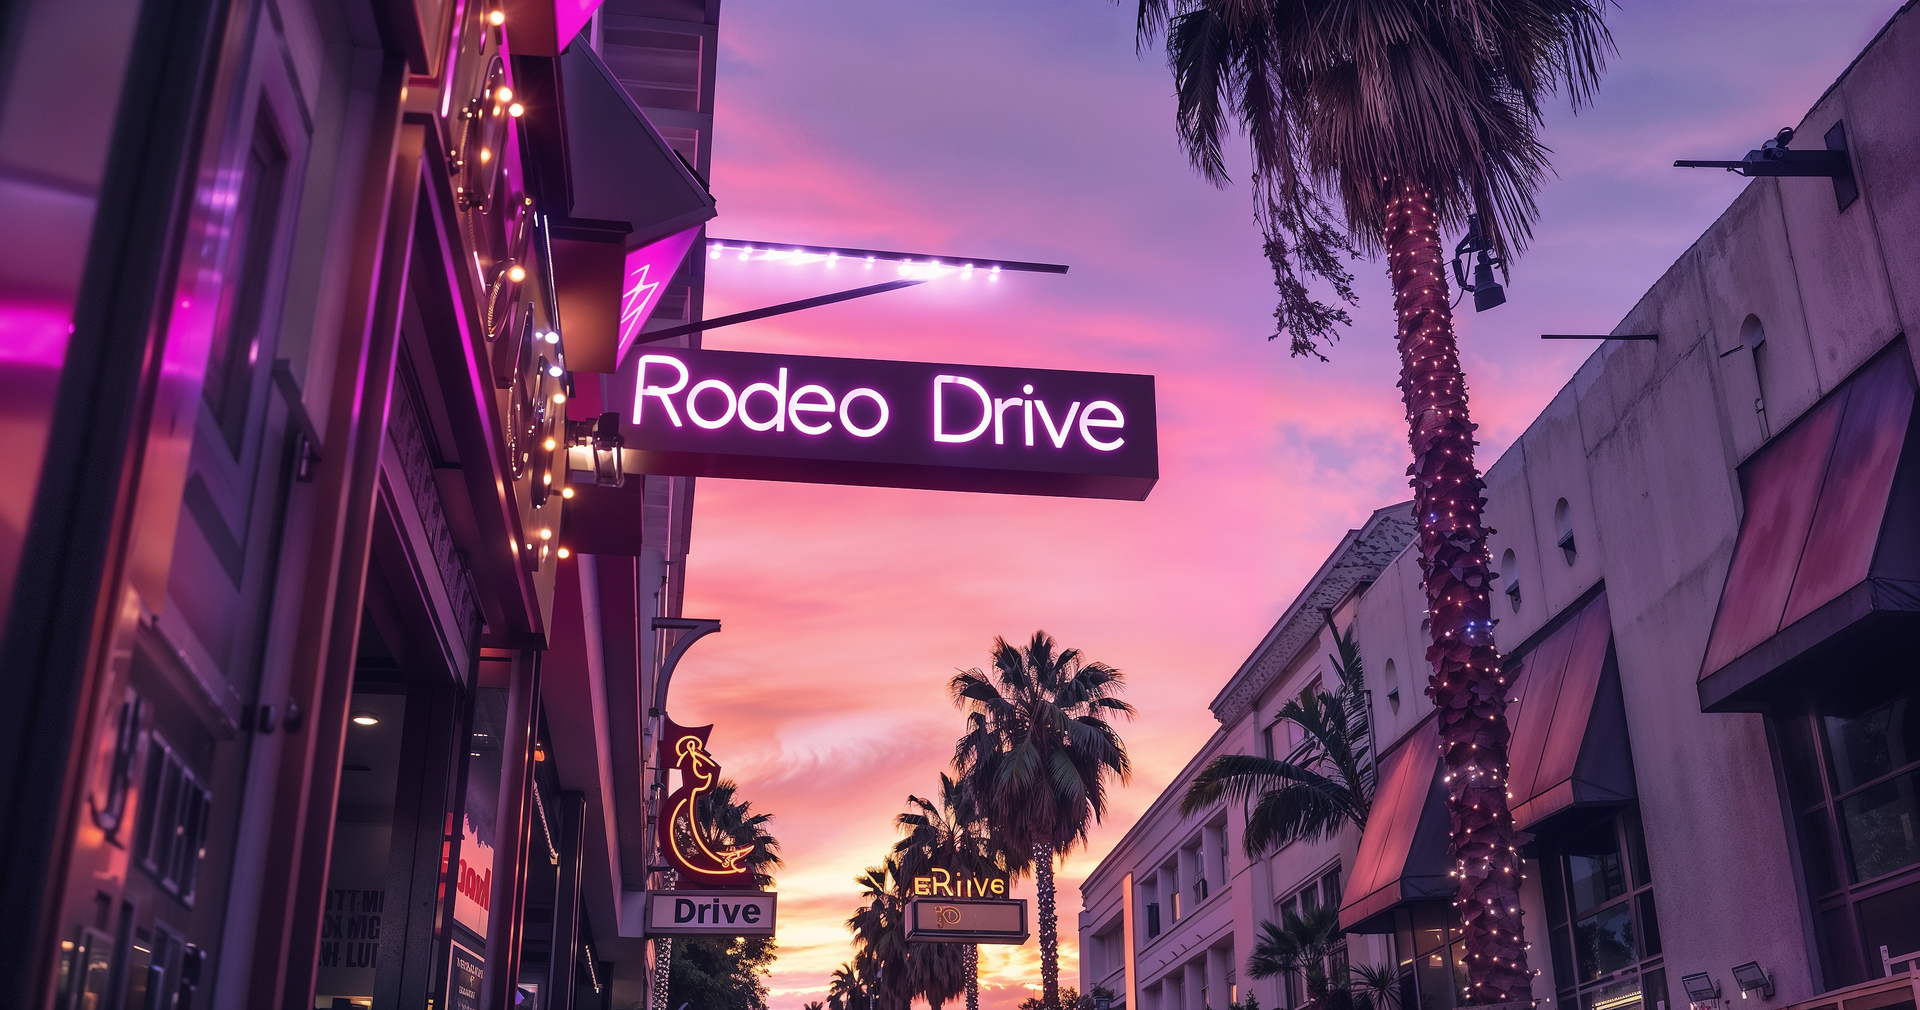 Rodeo Drive for retail services is an example of a descriptive trademark